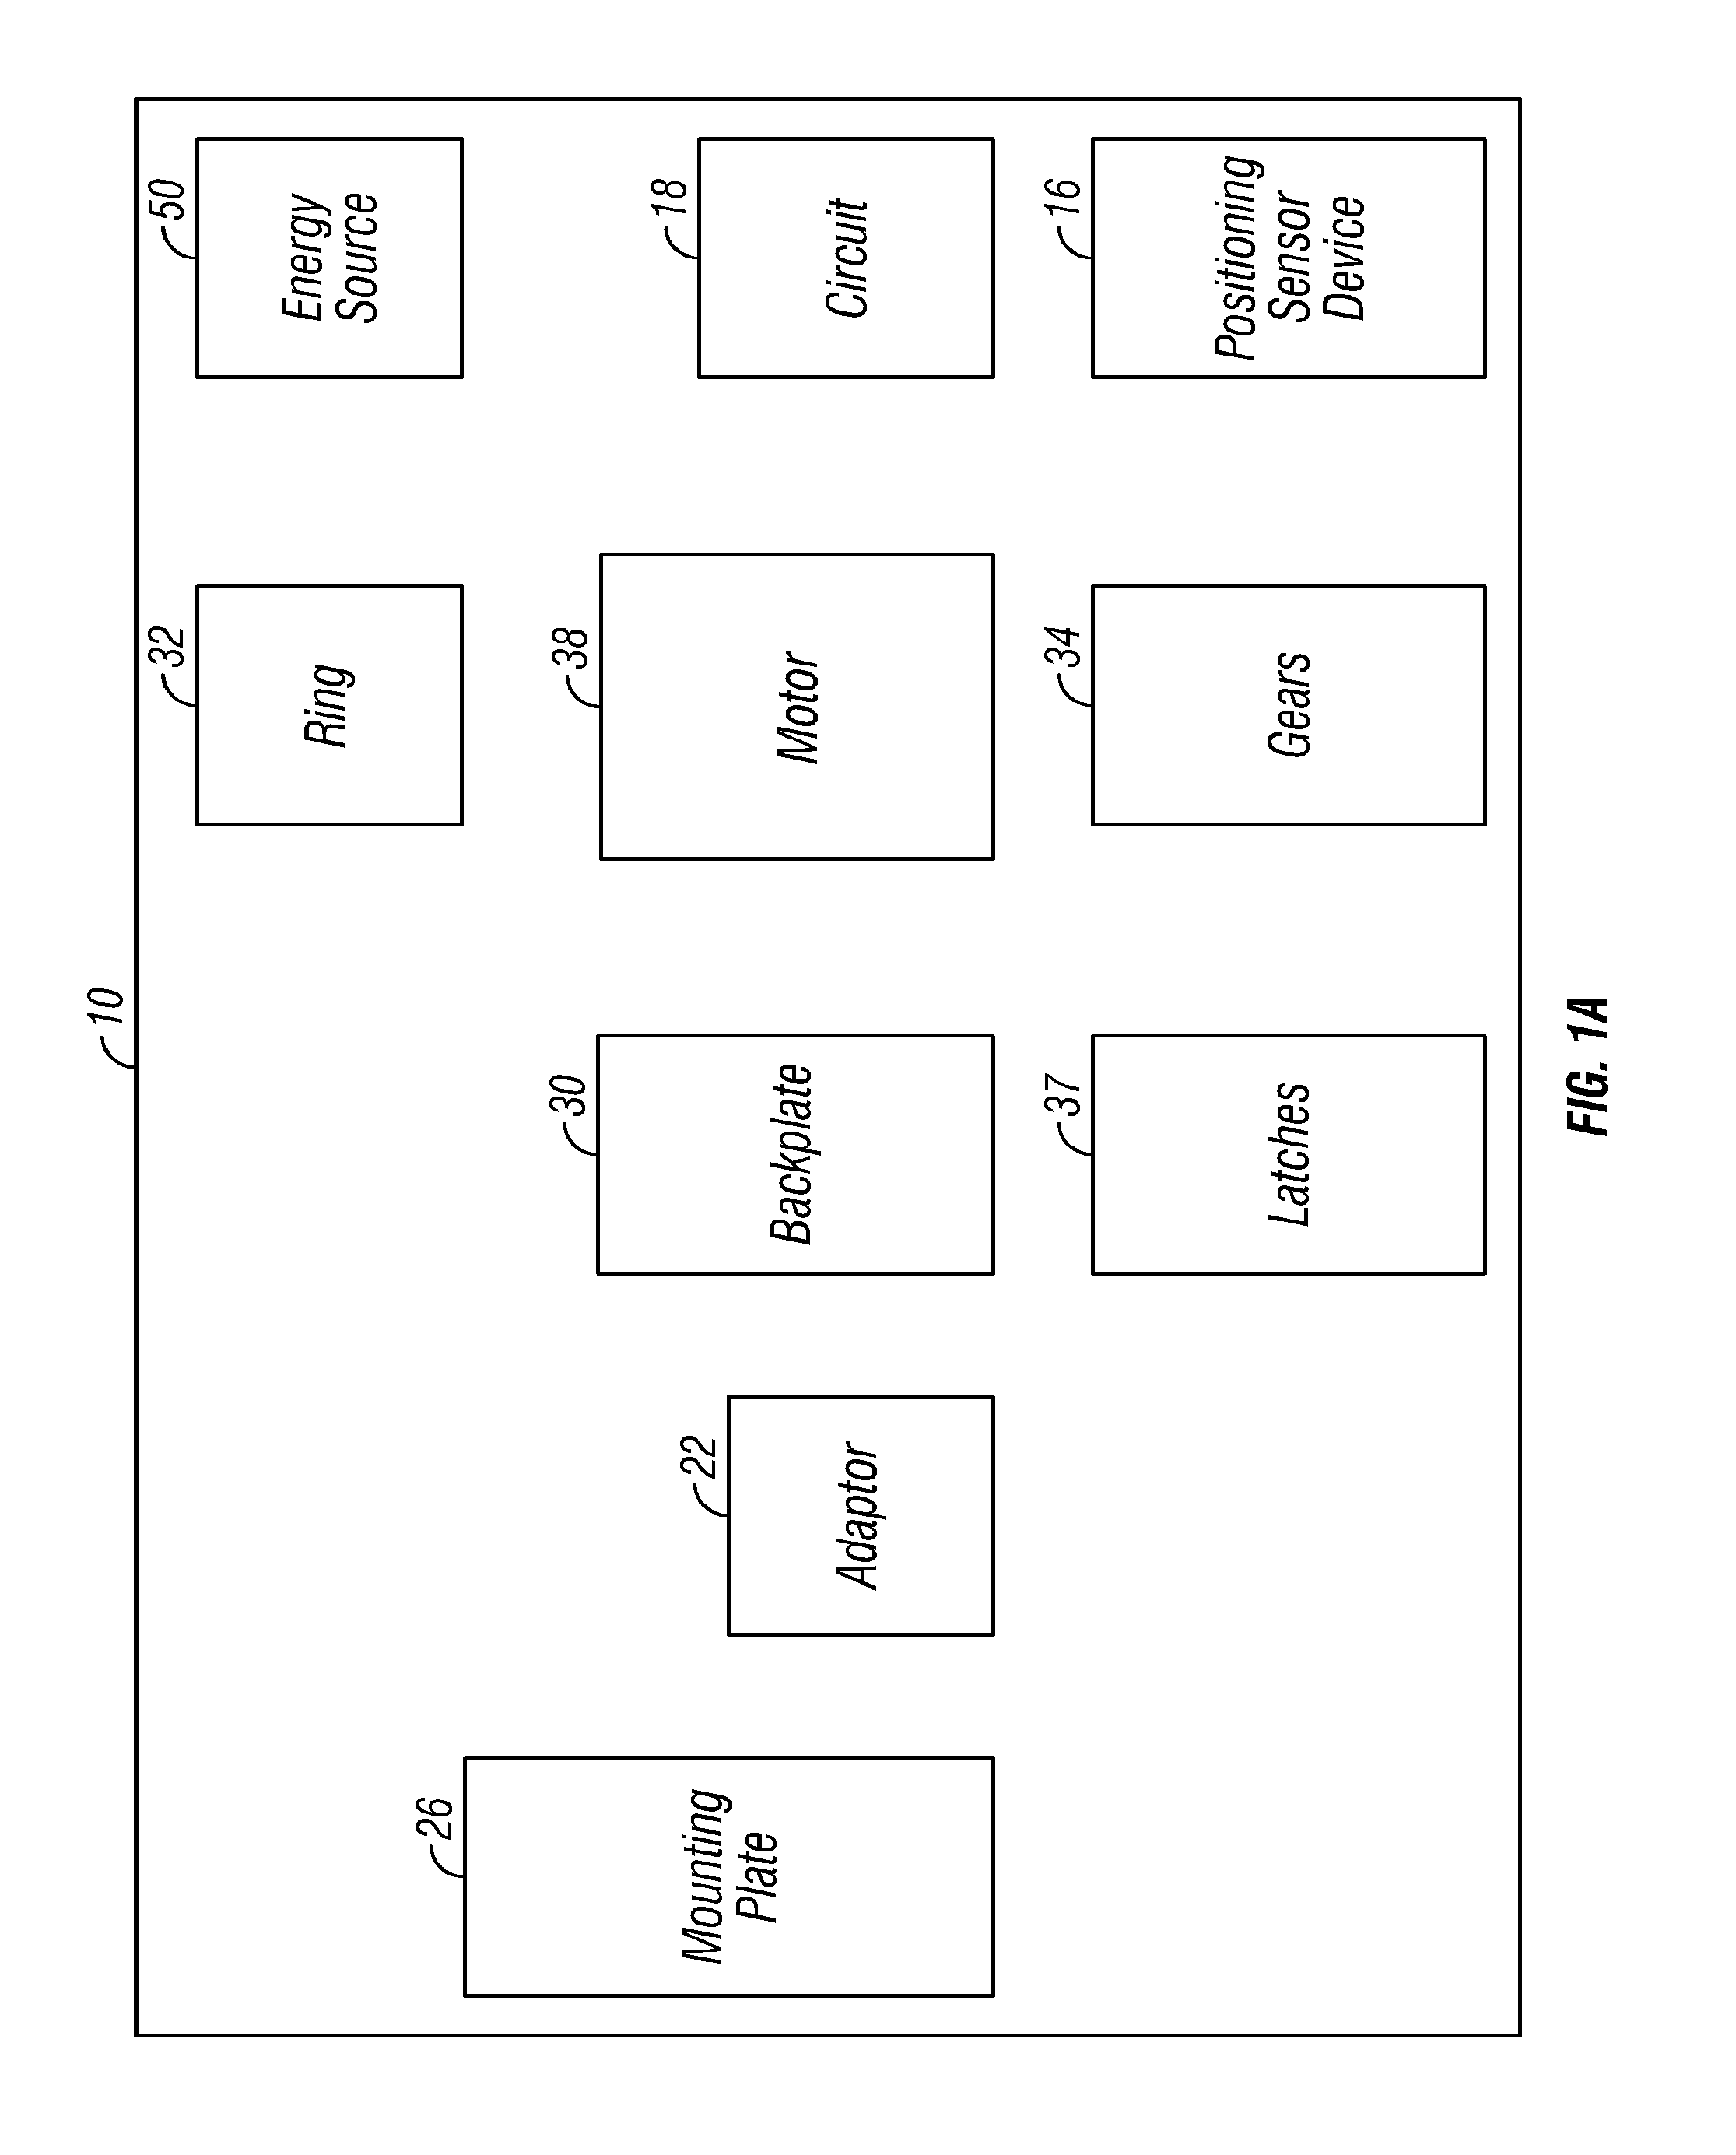 Wireless access control system and methods for intelligent door lock system